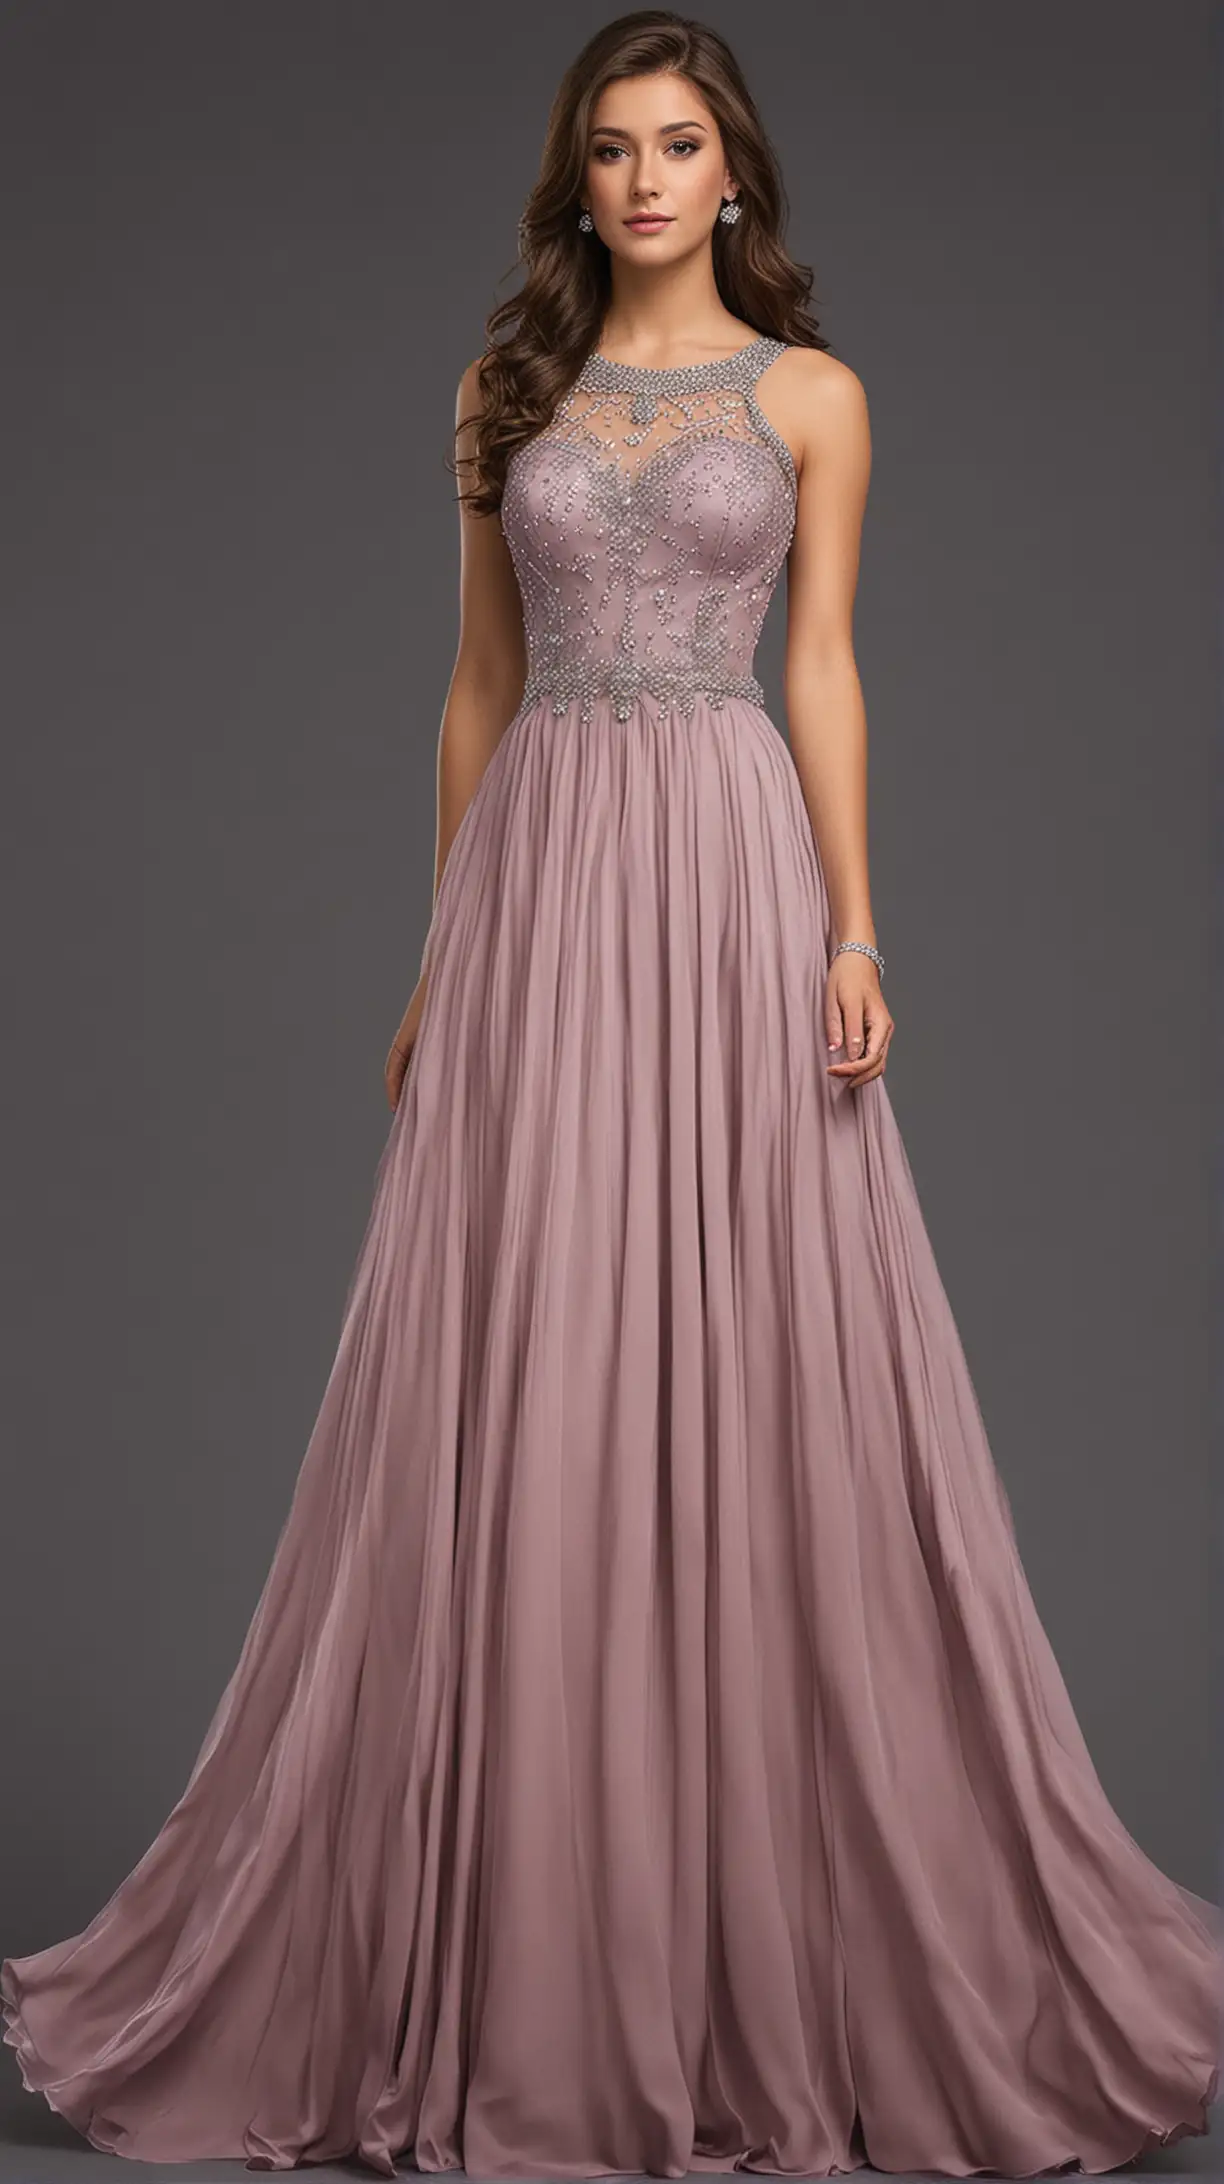 prom dress for girls dark colors and jewelry